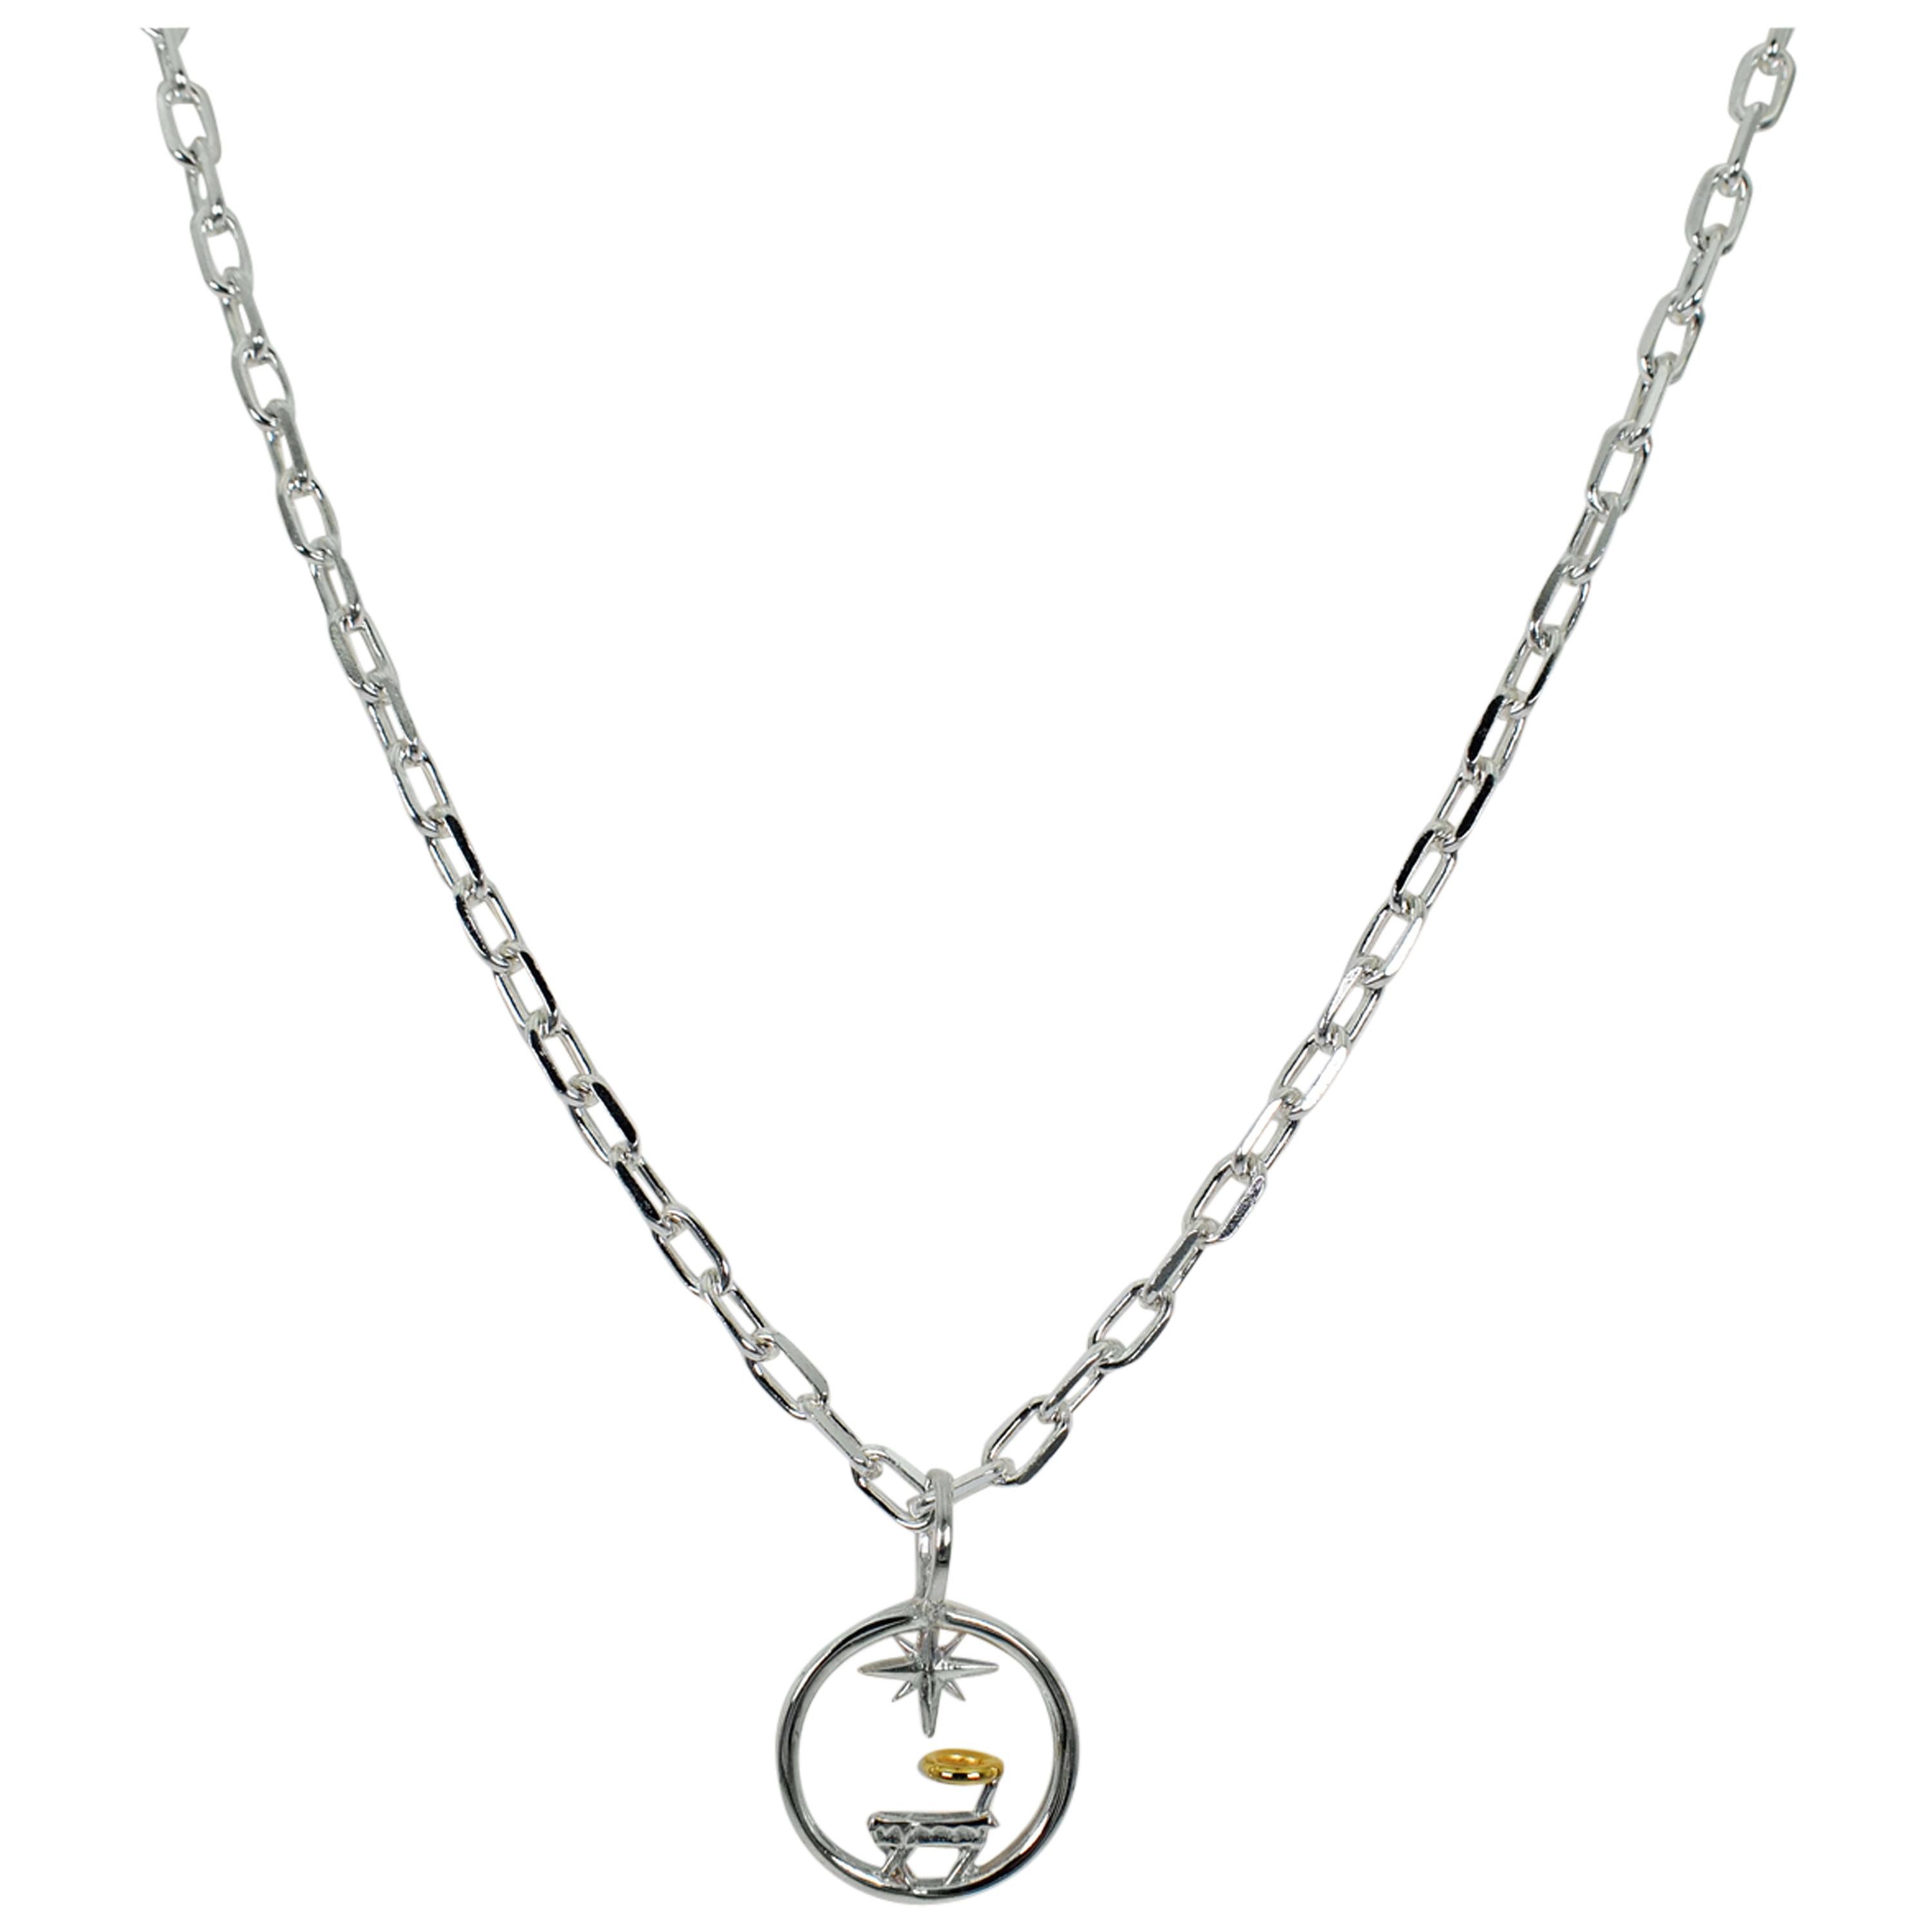 Savior is Born, Stories in a Circle Sterling Silver Pendant Necklace